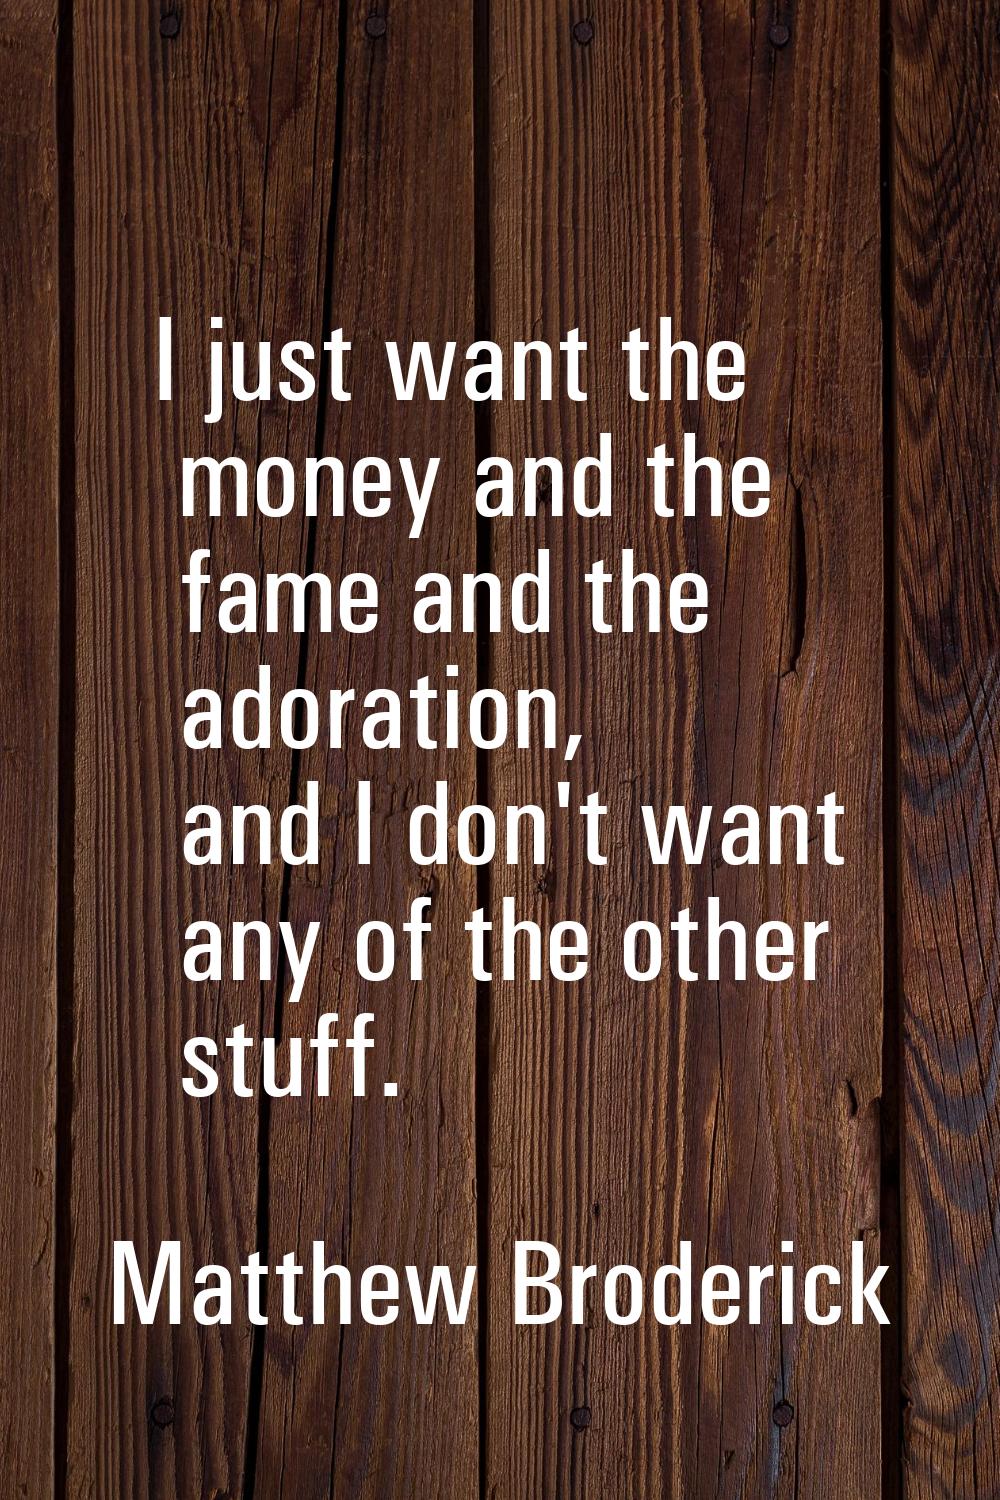 I just want the money and the fame and the adoration, and I don't want any of the other stuff.